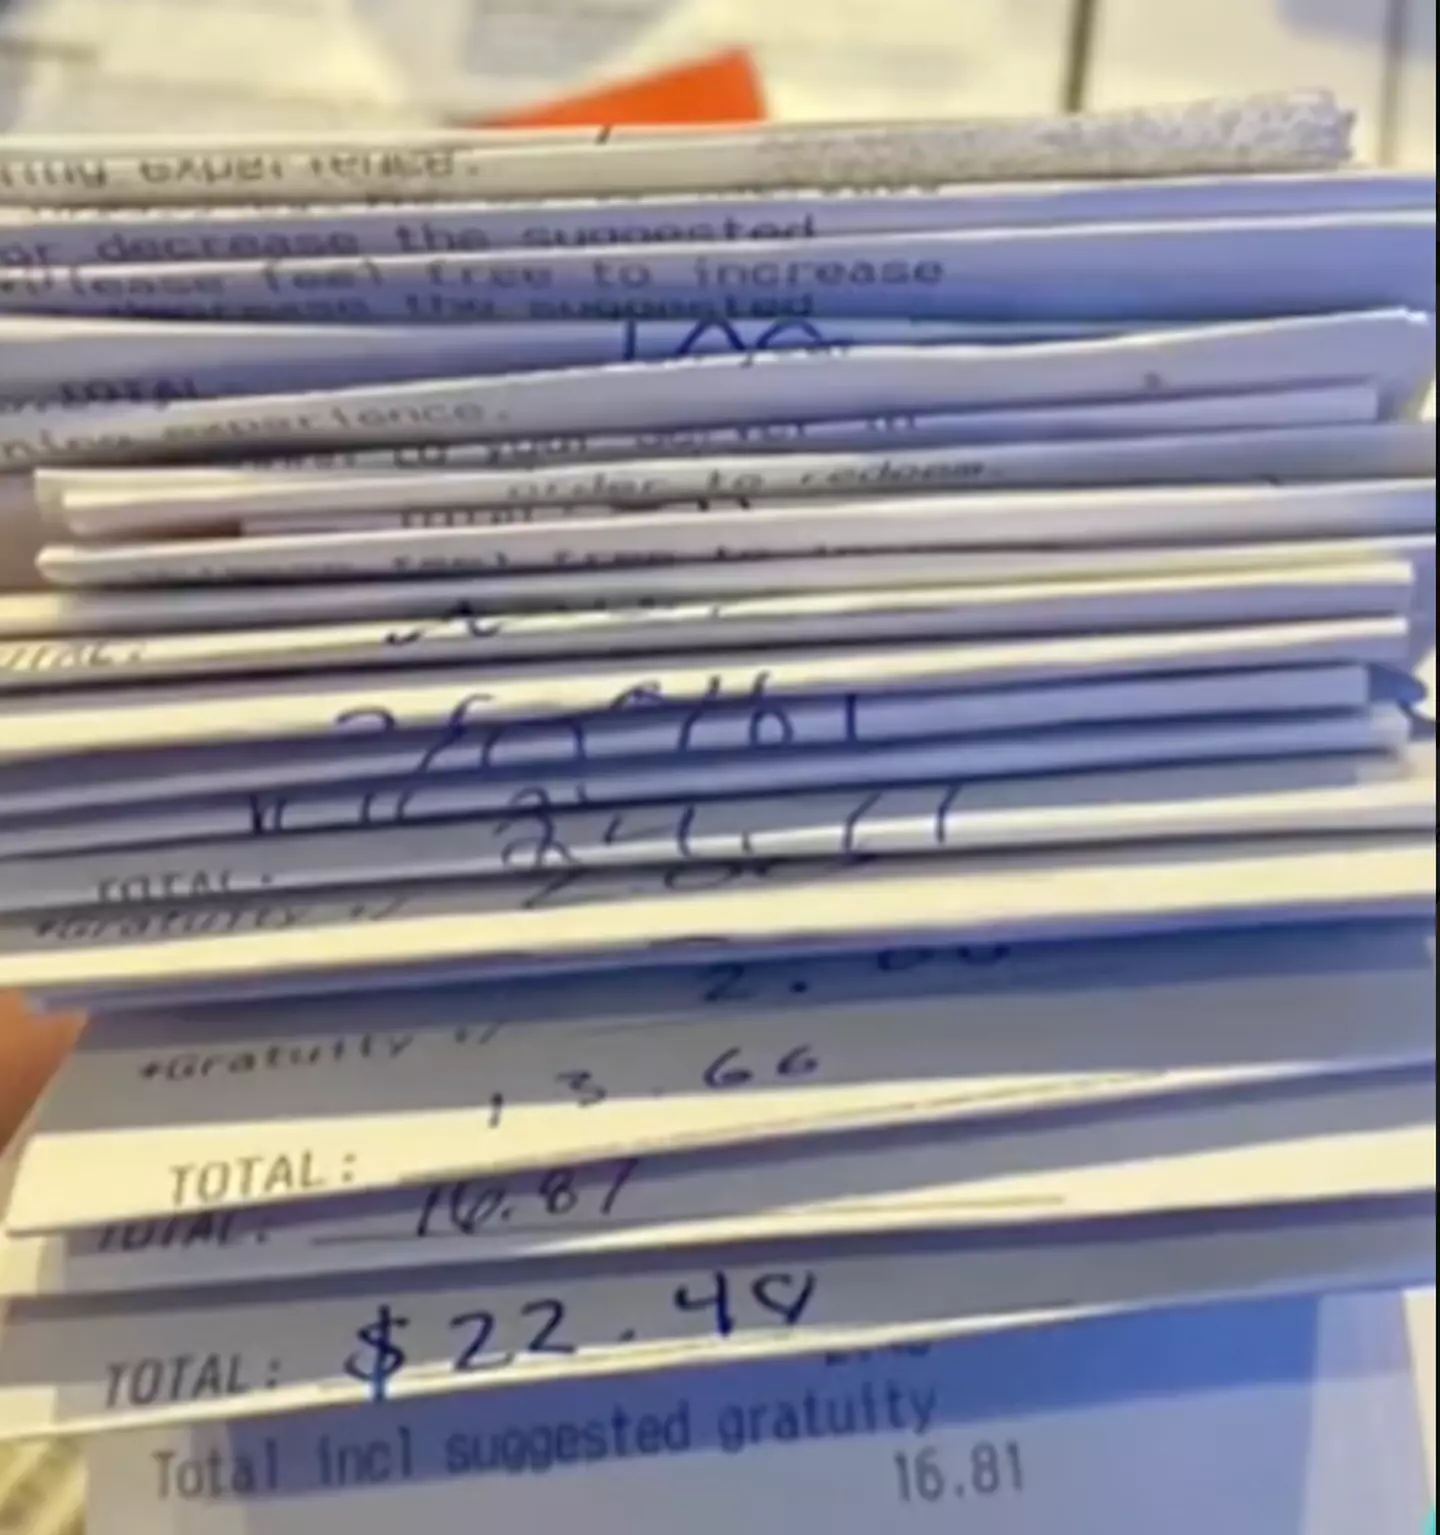 The receipts certainly piled up.